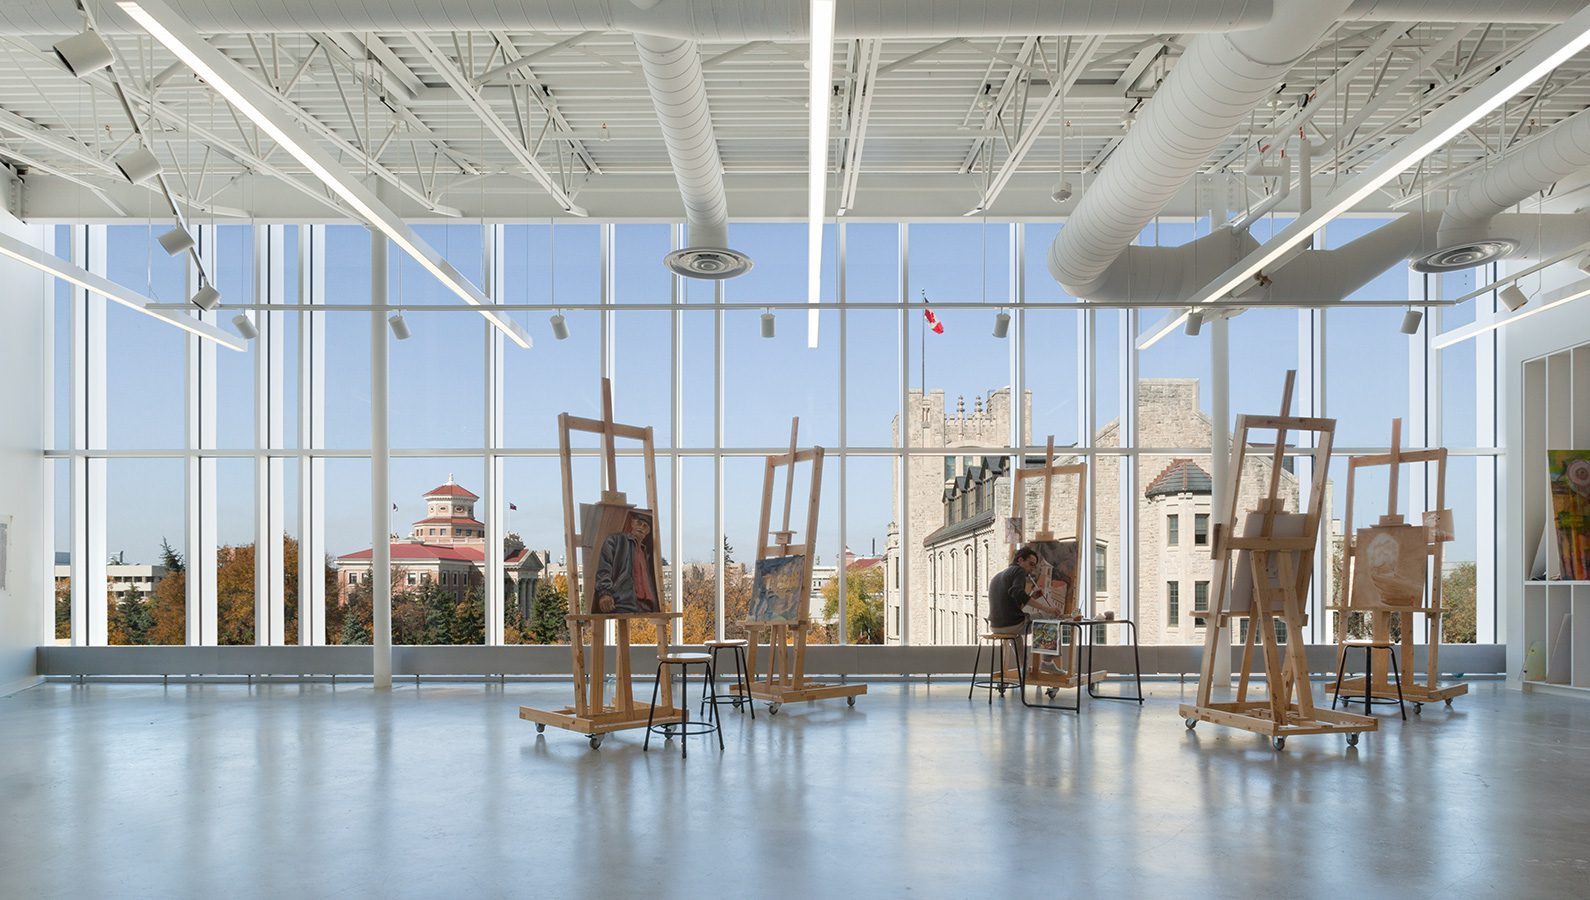 University of Manitoba ARTLab studio space with painting easels overlooking the greater campus.